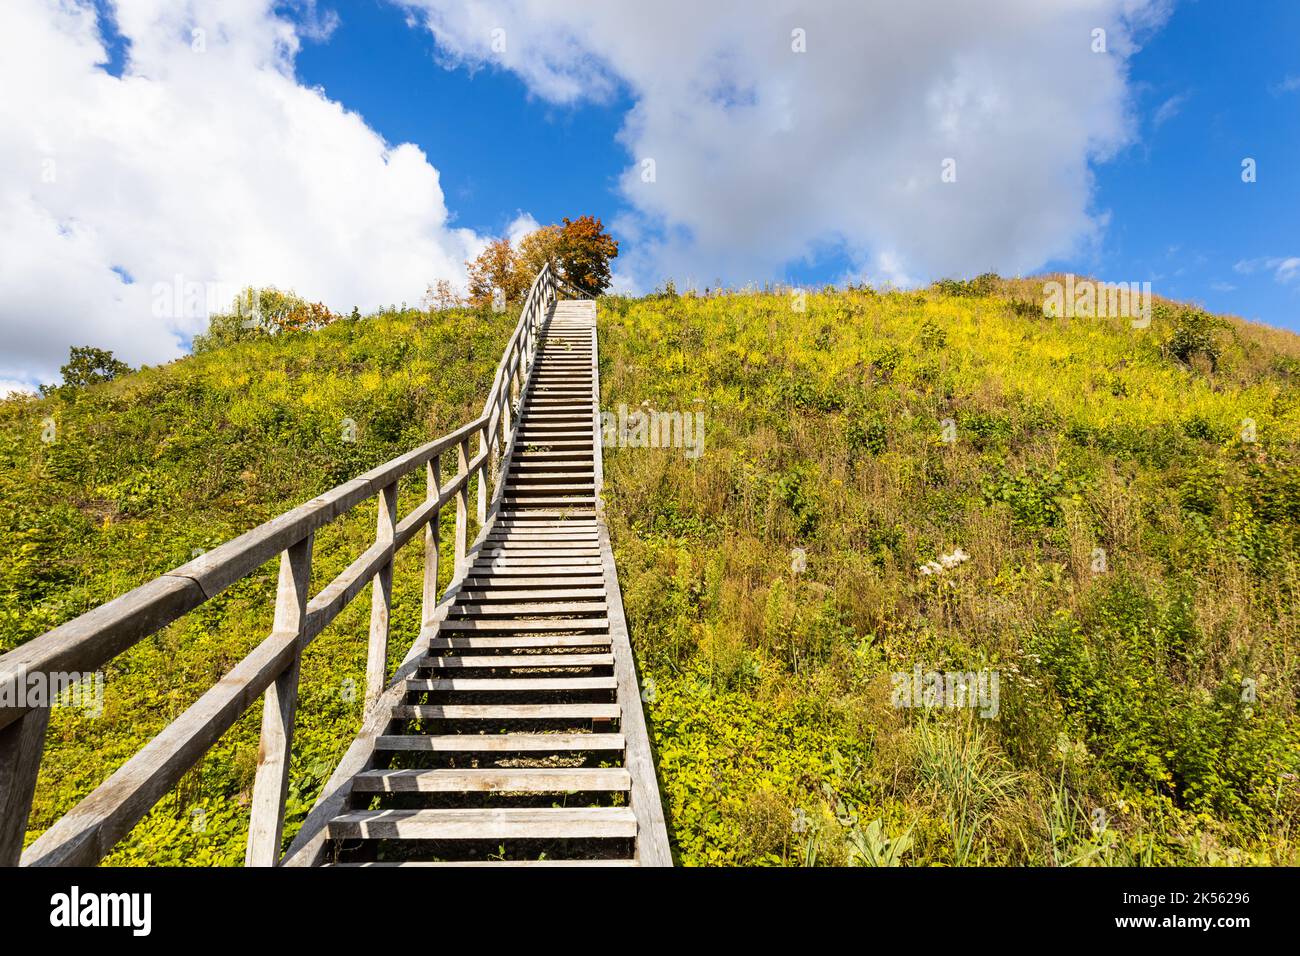 Wooden stairs in the middle of nature to climb up or go down Stock Photo